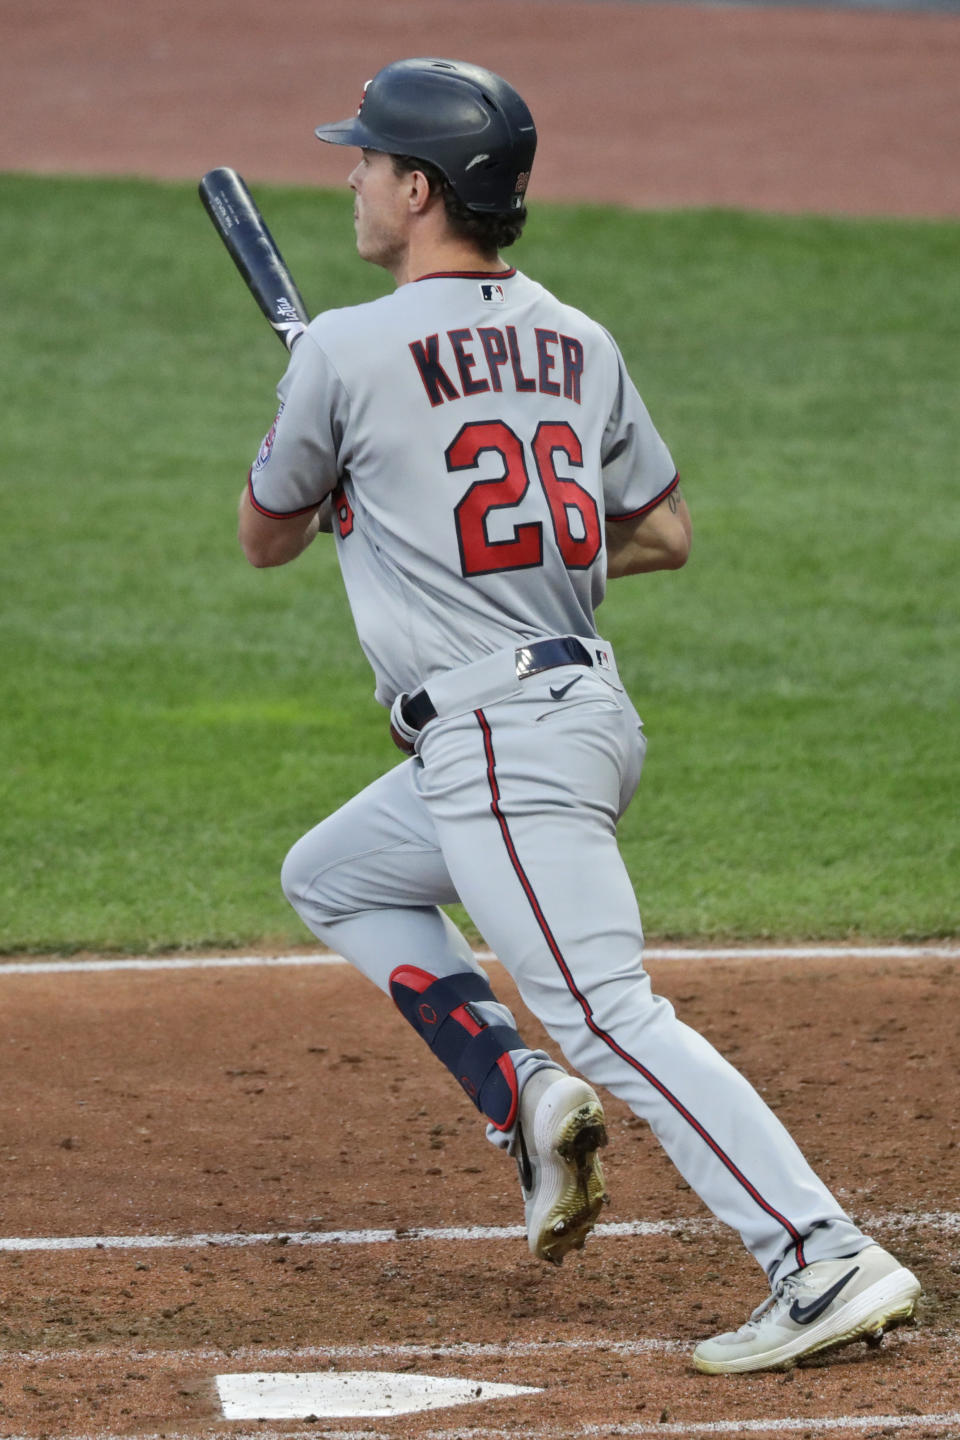 Minnesota Twins' Max Kepler watches his RBI single during the second inning of the team's baseball game against the Cleveland Indians, Tuesday, Aug. 25, 2020, in Cleveland. (AP Photo/Tony Dejak)